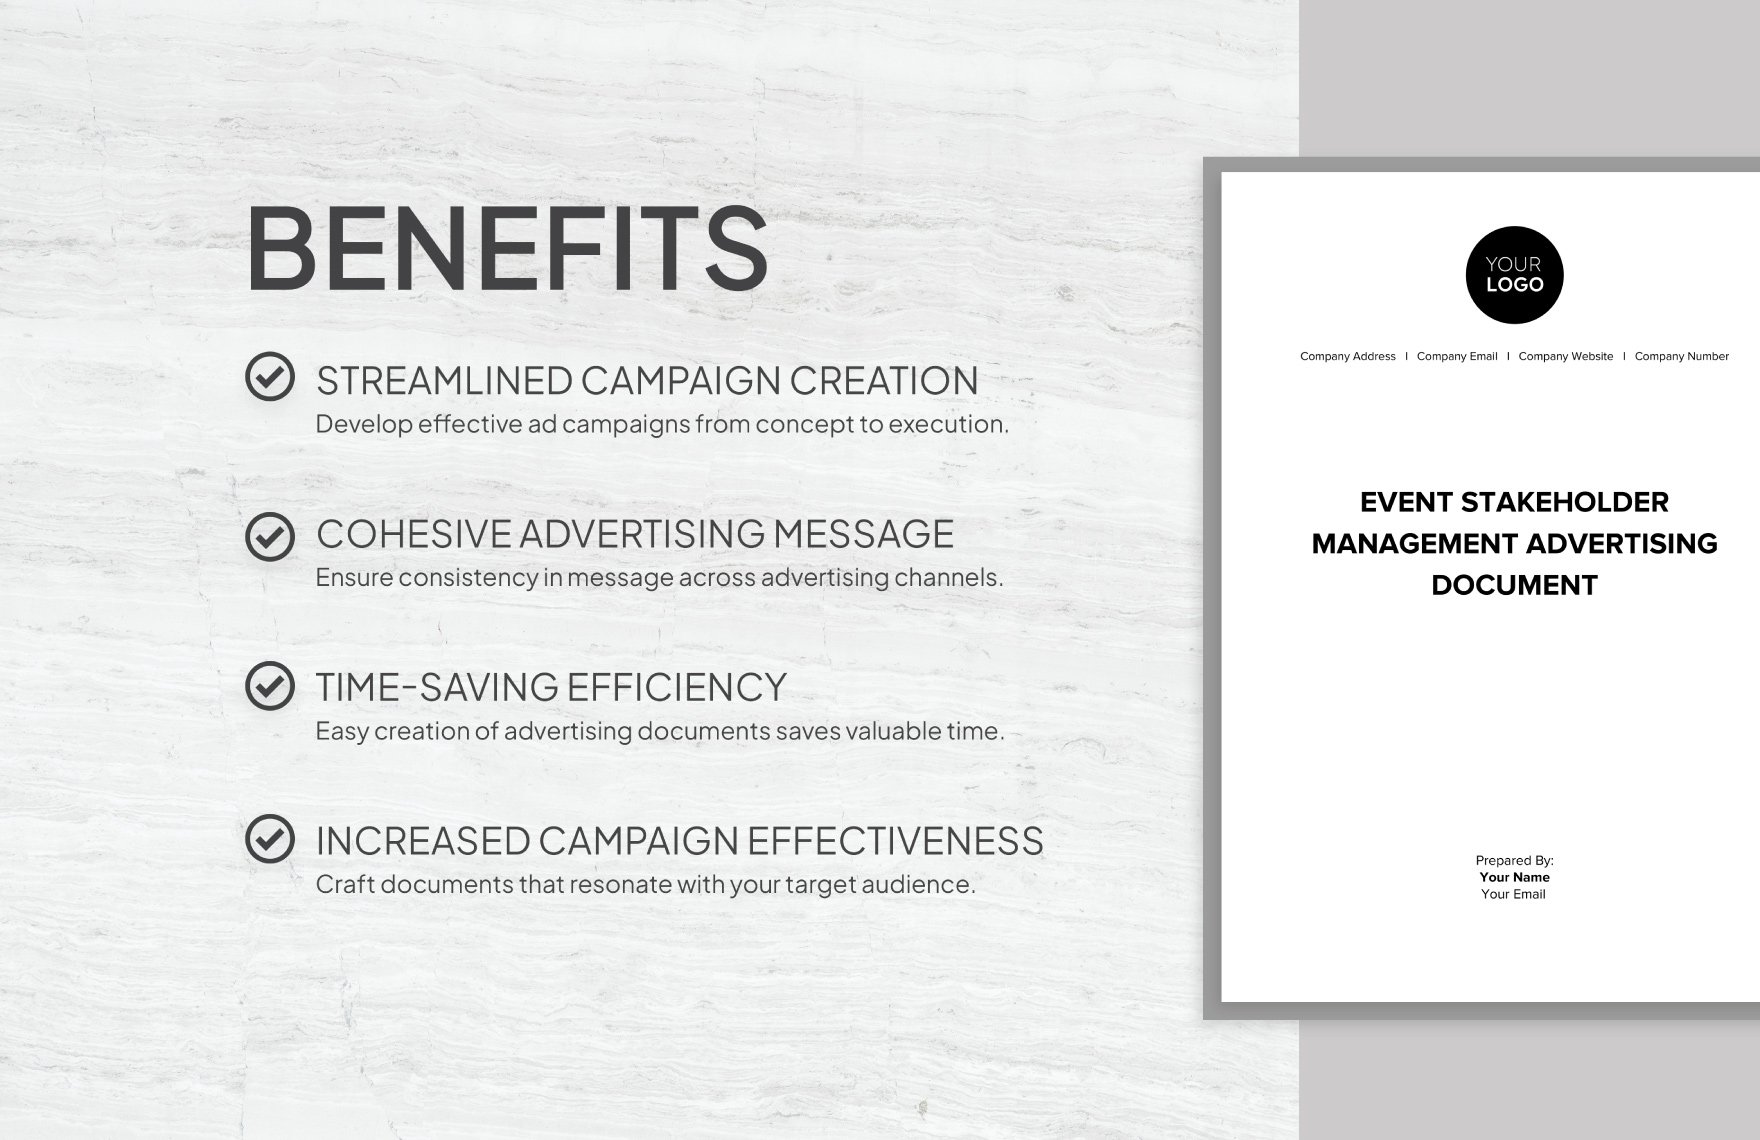 Event Stakeholder Management Advertising Document Template